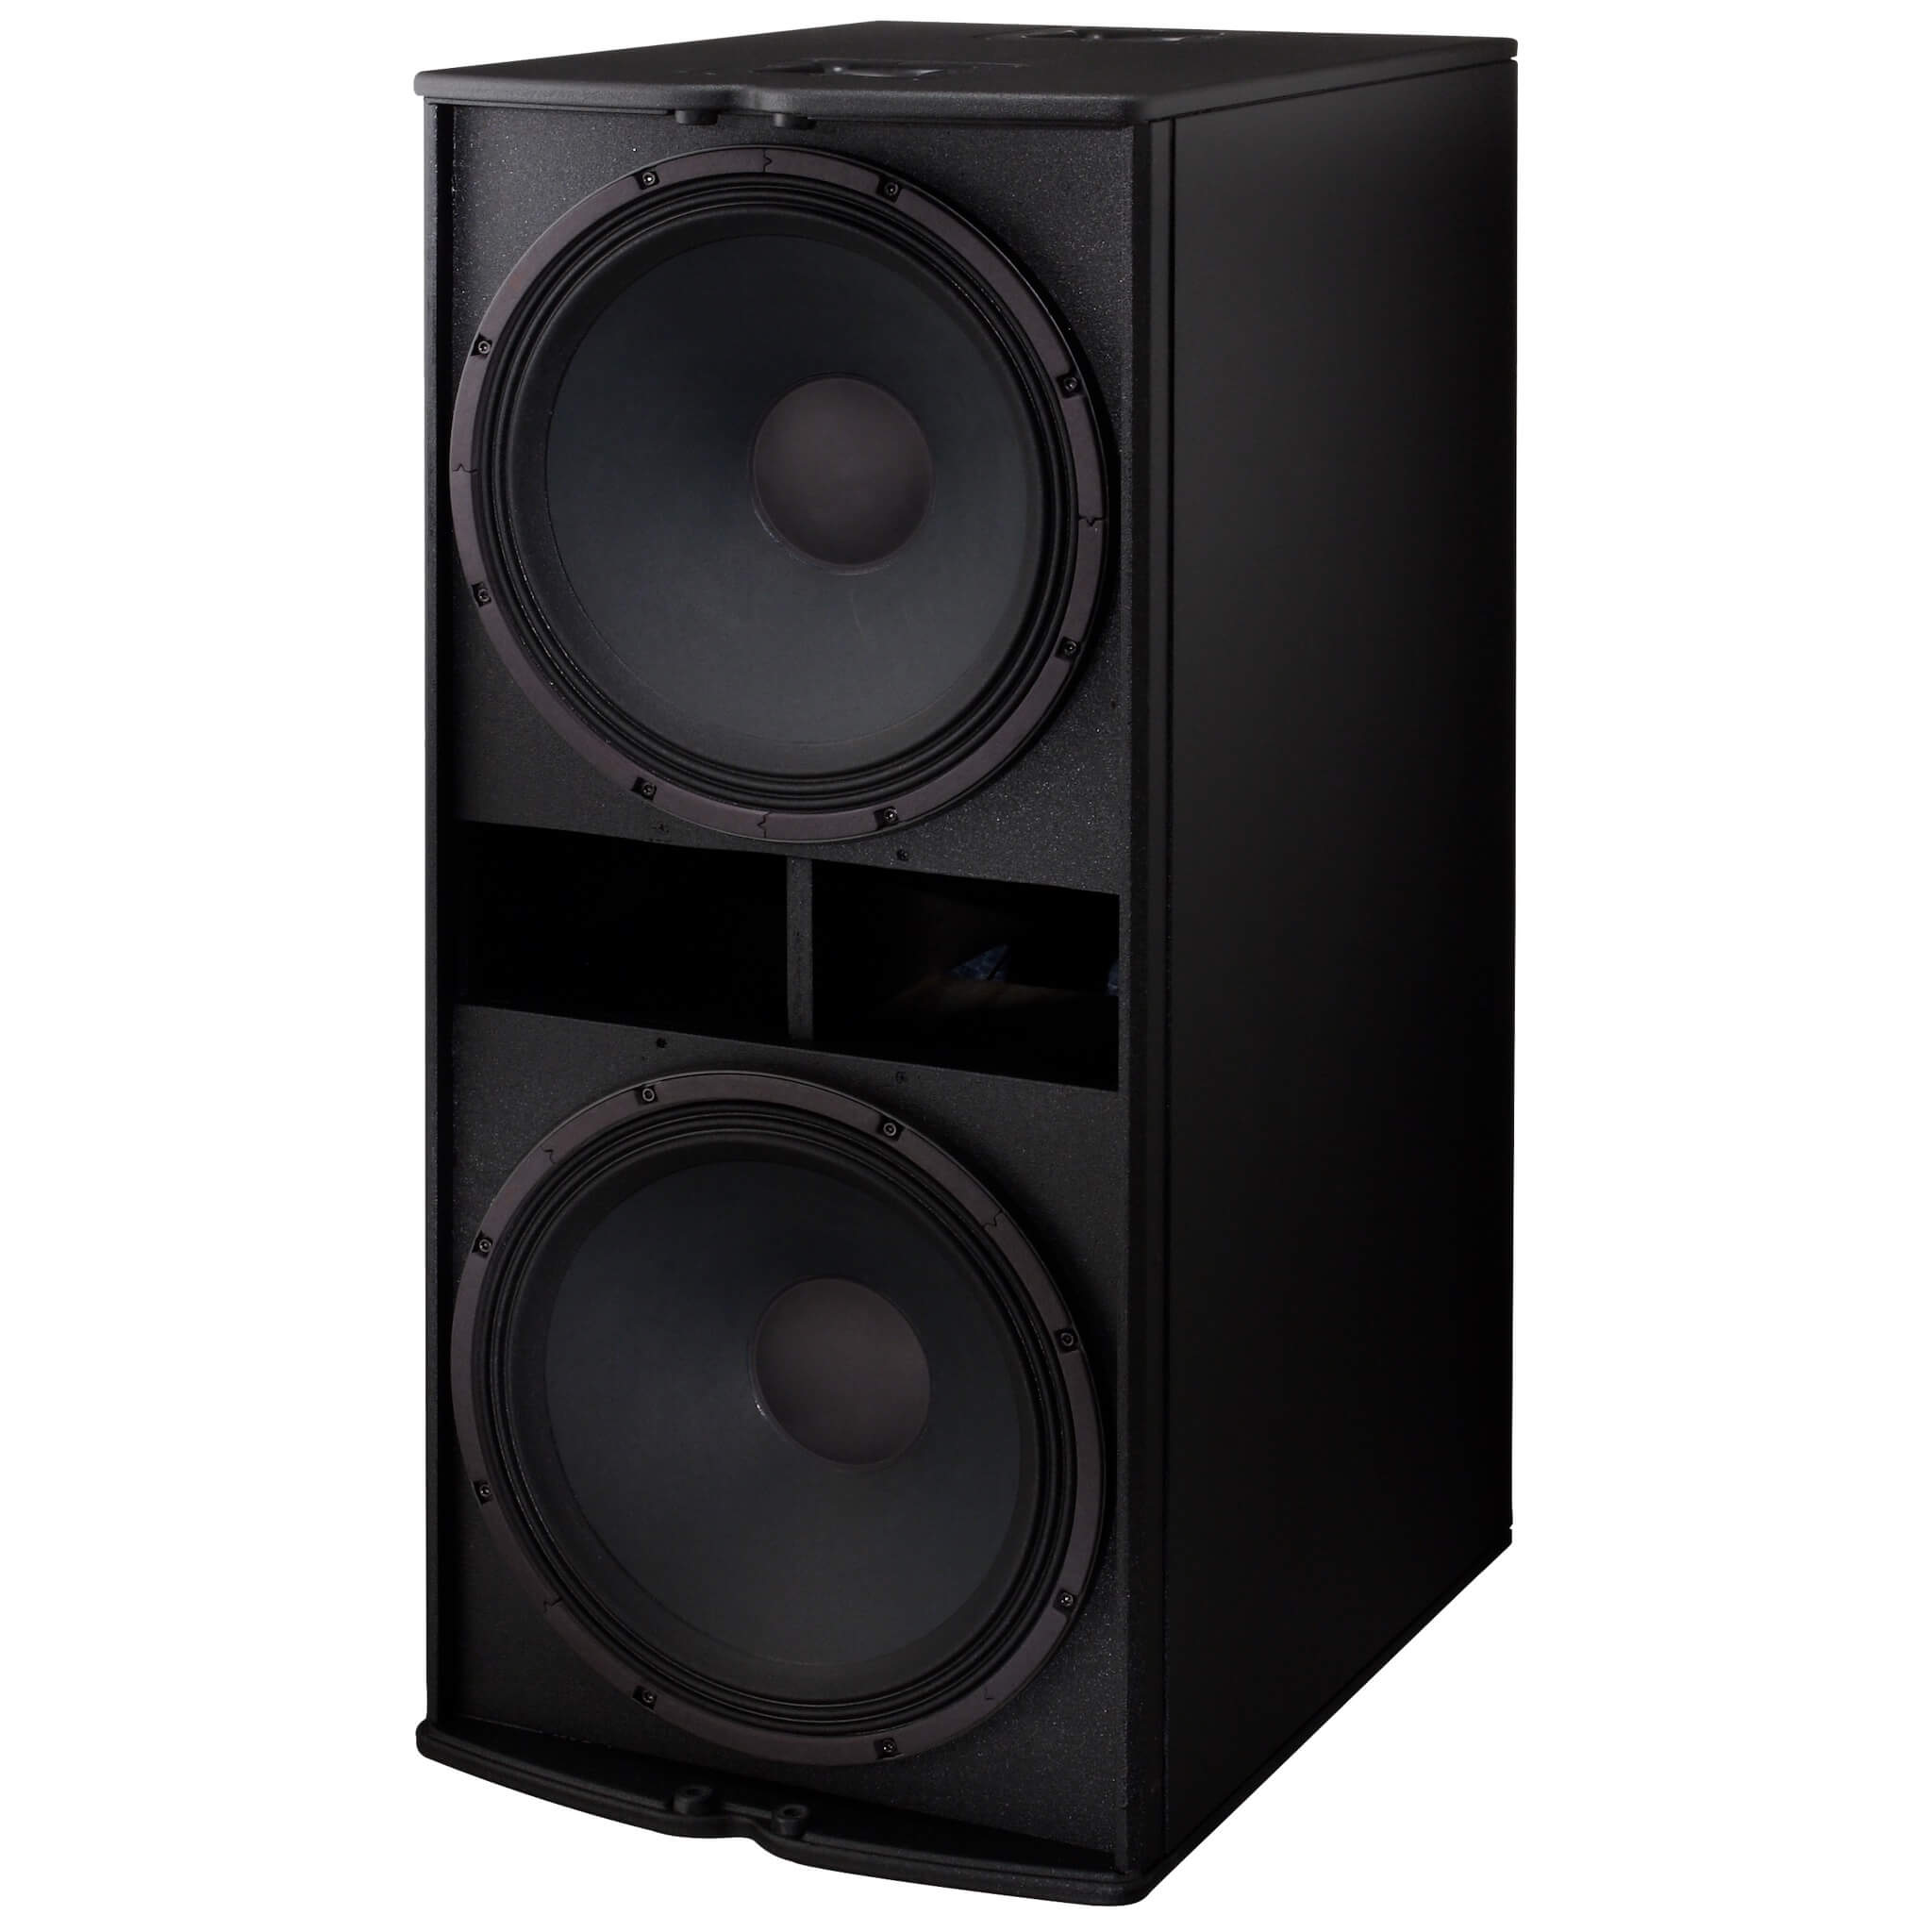 Electro-Voice TX2181 - Dual 18-inch Passive Subwoofer, angle no grill